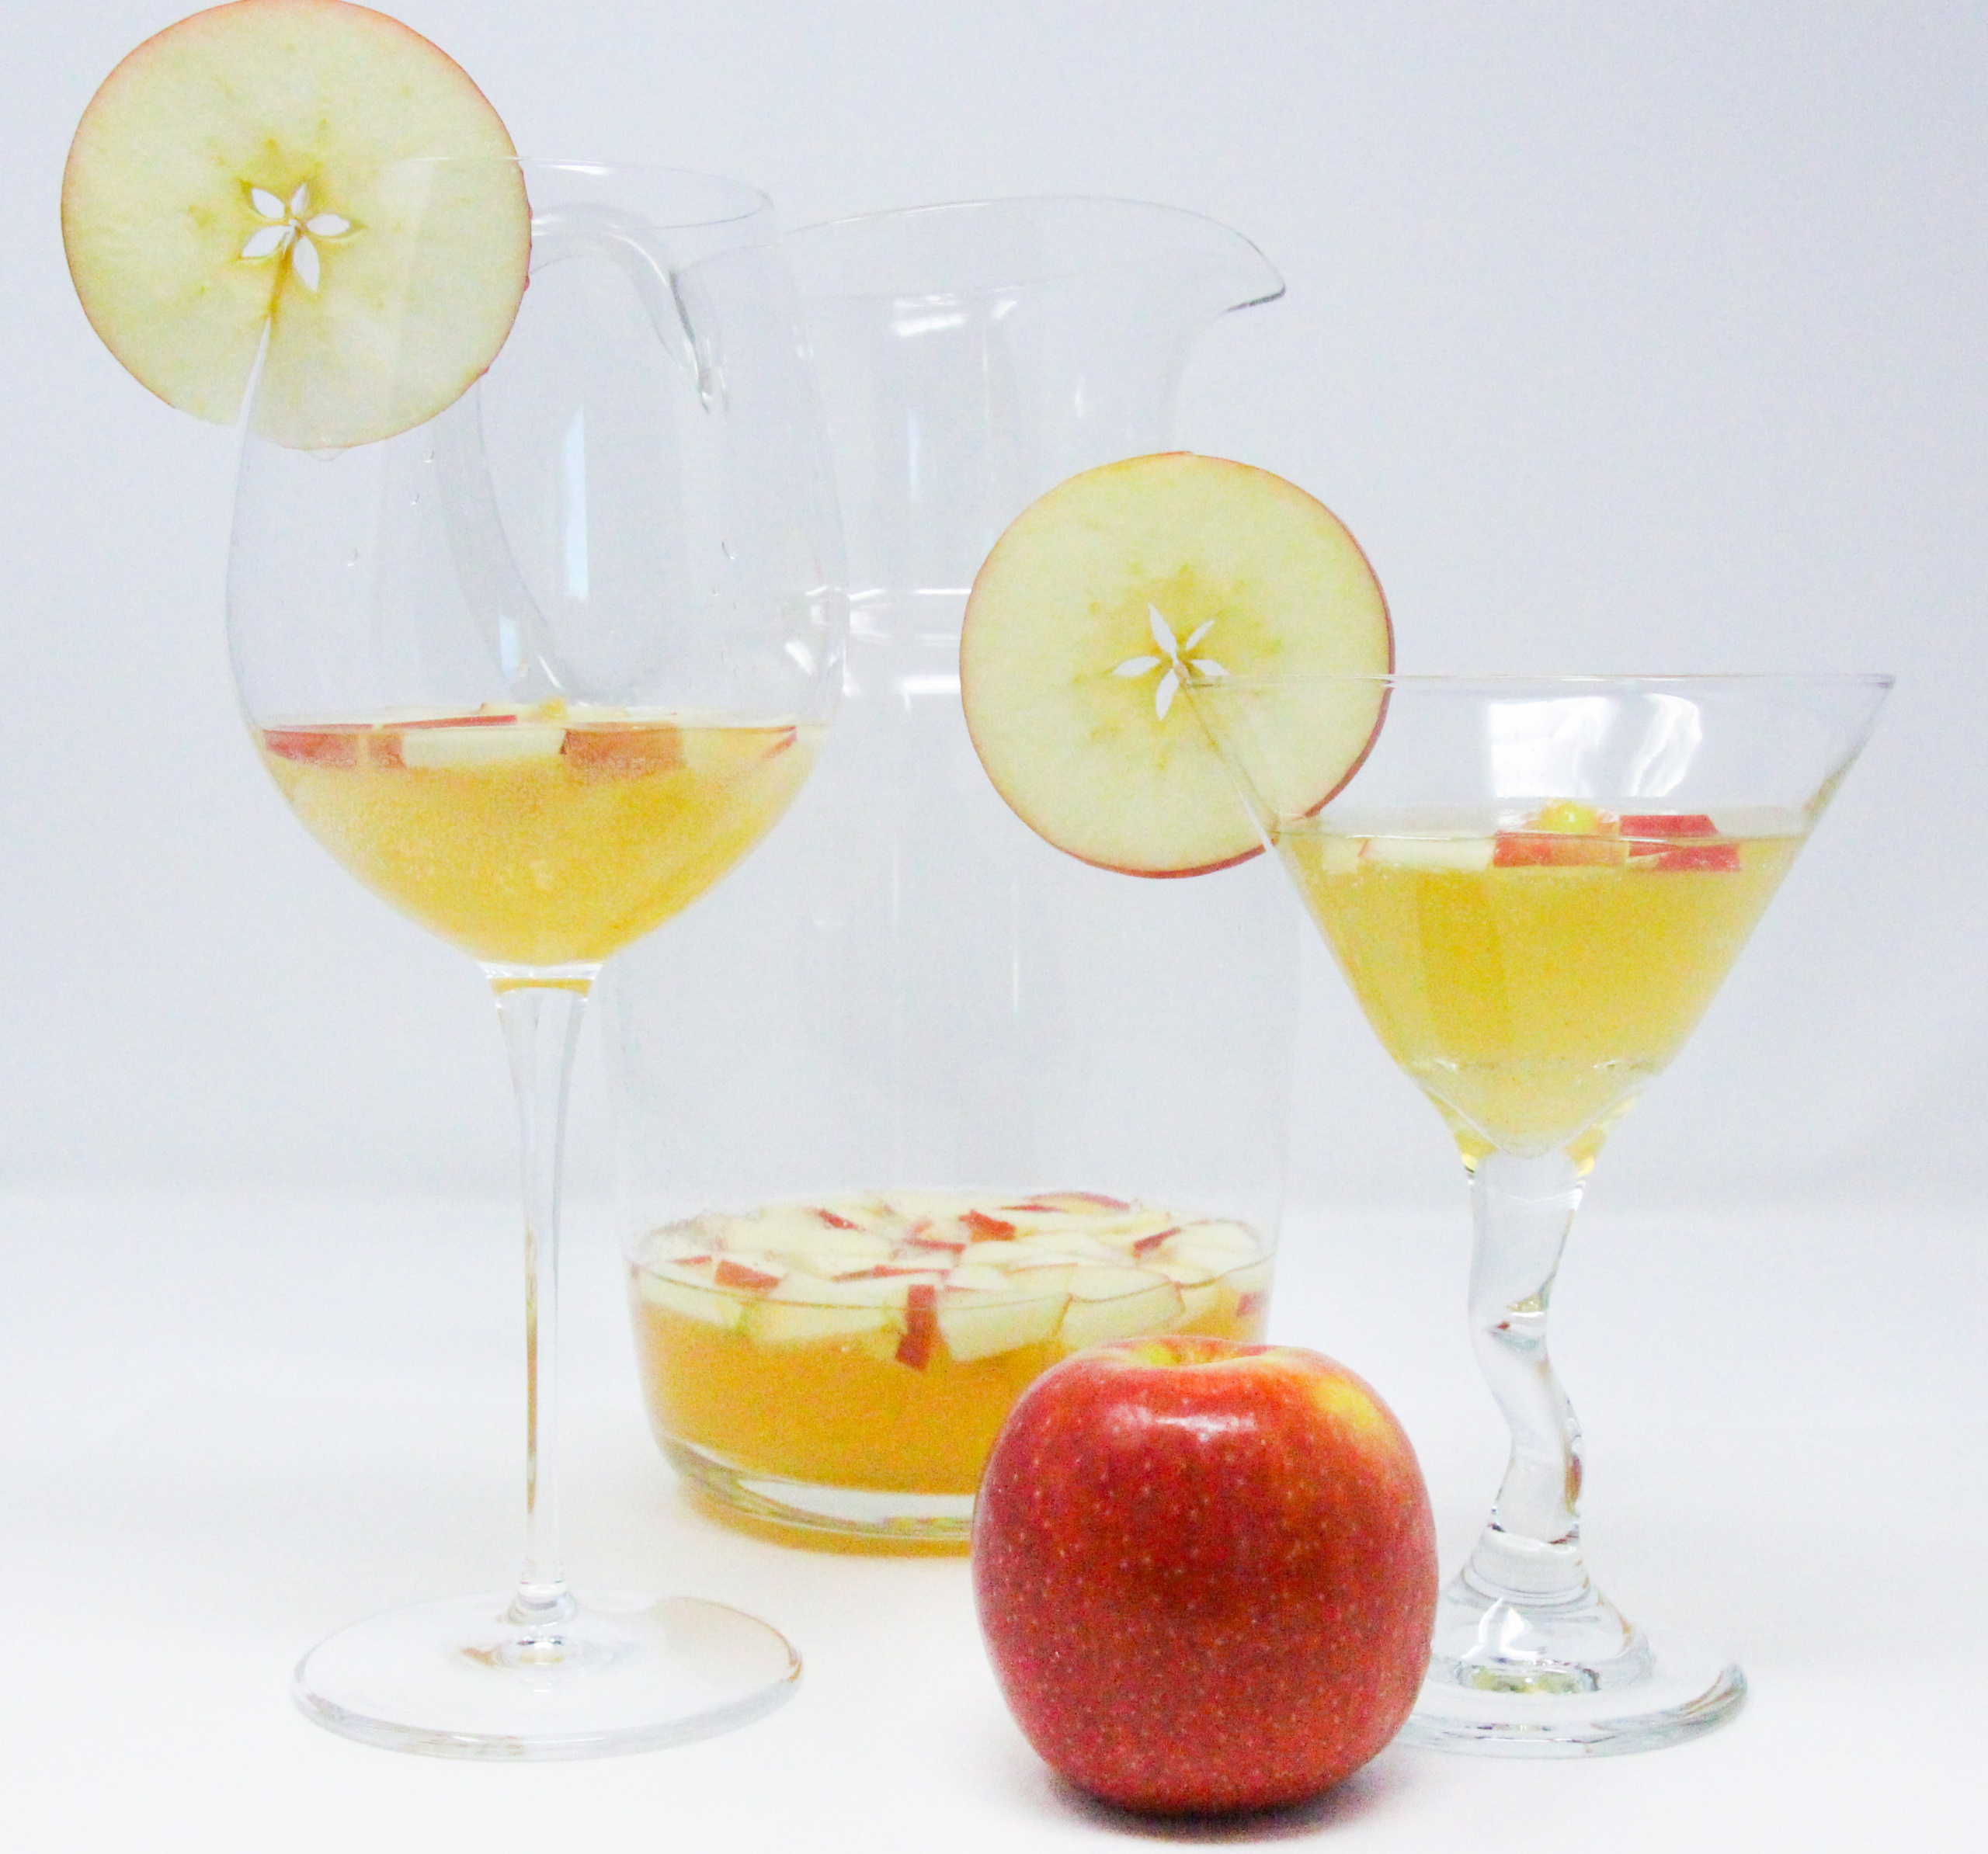 With sparkling white wine for bubbly fun, pear juice for sweetness, and honeyed whiskey along with pear liqueur for kick, this delicious libation brings to mind parties, summertime poolside relaxation, or a delightful drink to share with friends! Recipe shared with permission granted by Sarah E. Burr, author of #FollowMe for Murder